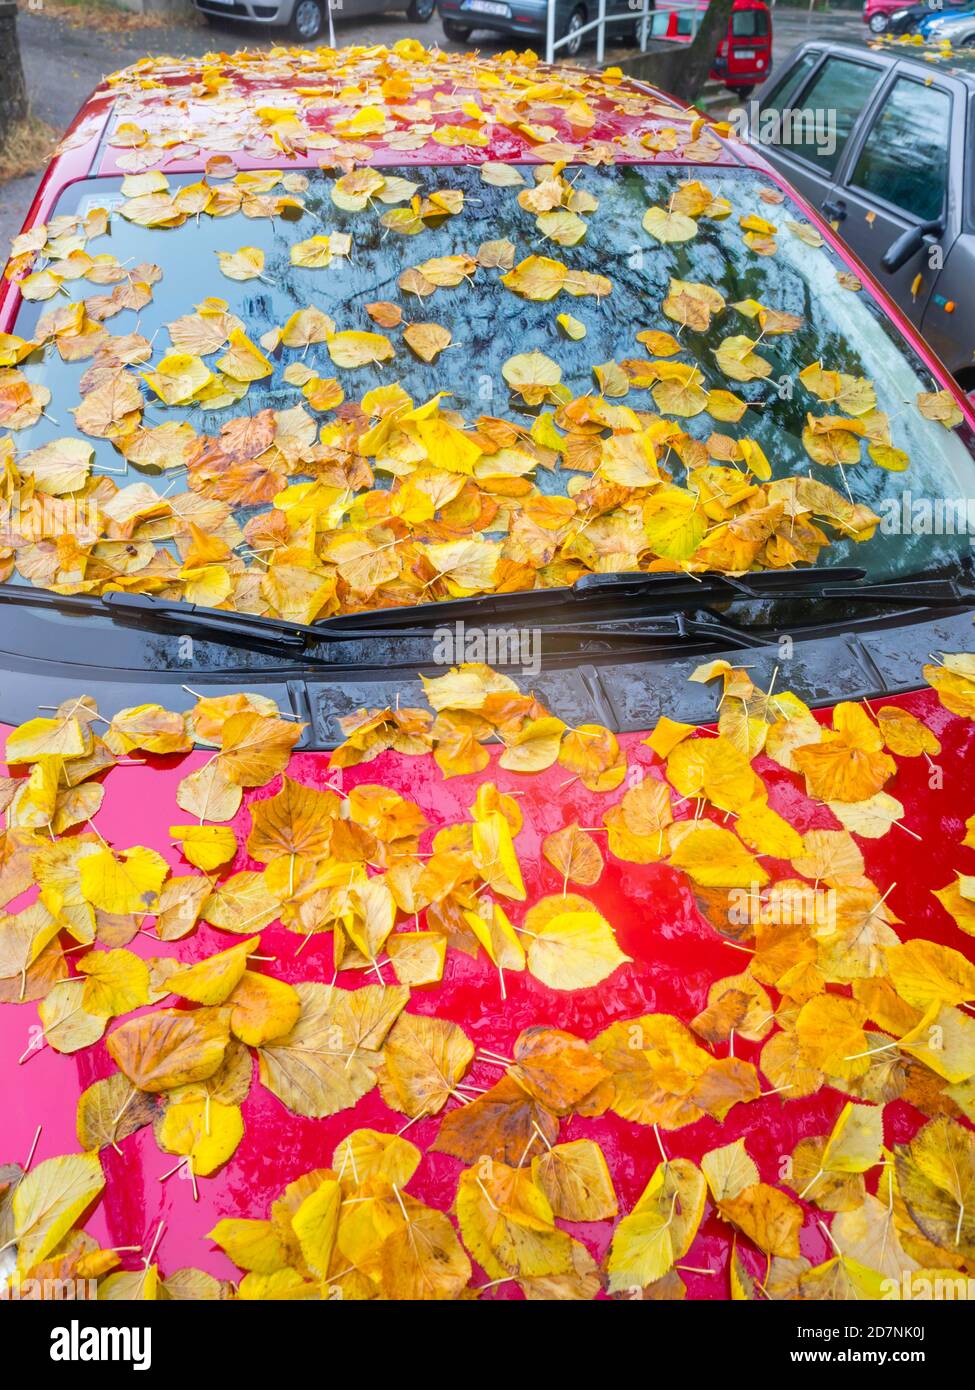 Fallen linden leaves on atop Red parked car vehicle Autumnal Autumn Fall season front windshield crop cropped view Stock Photo